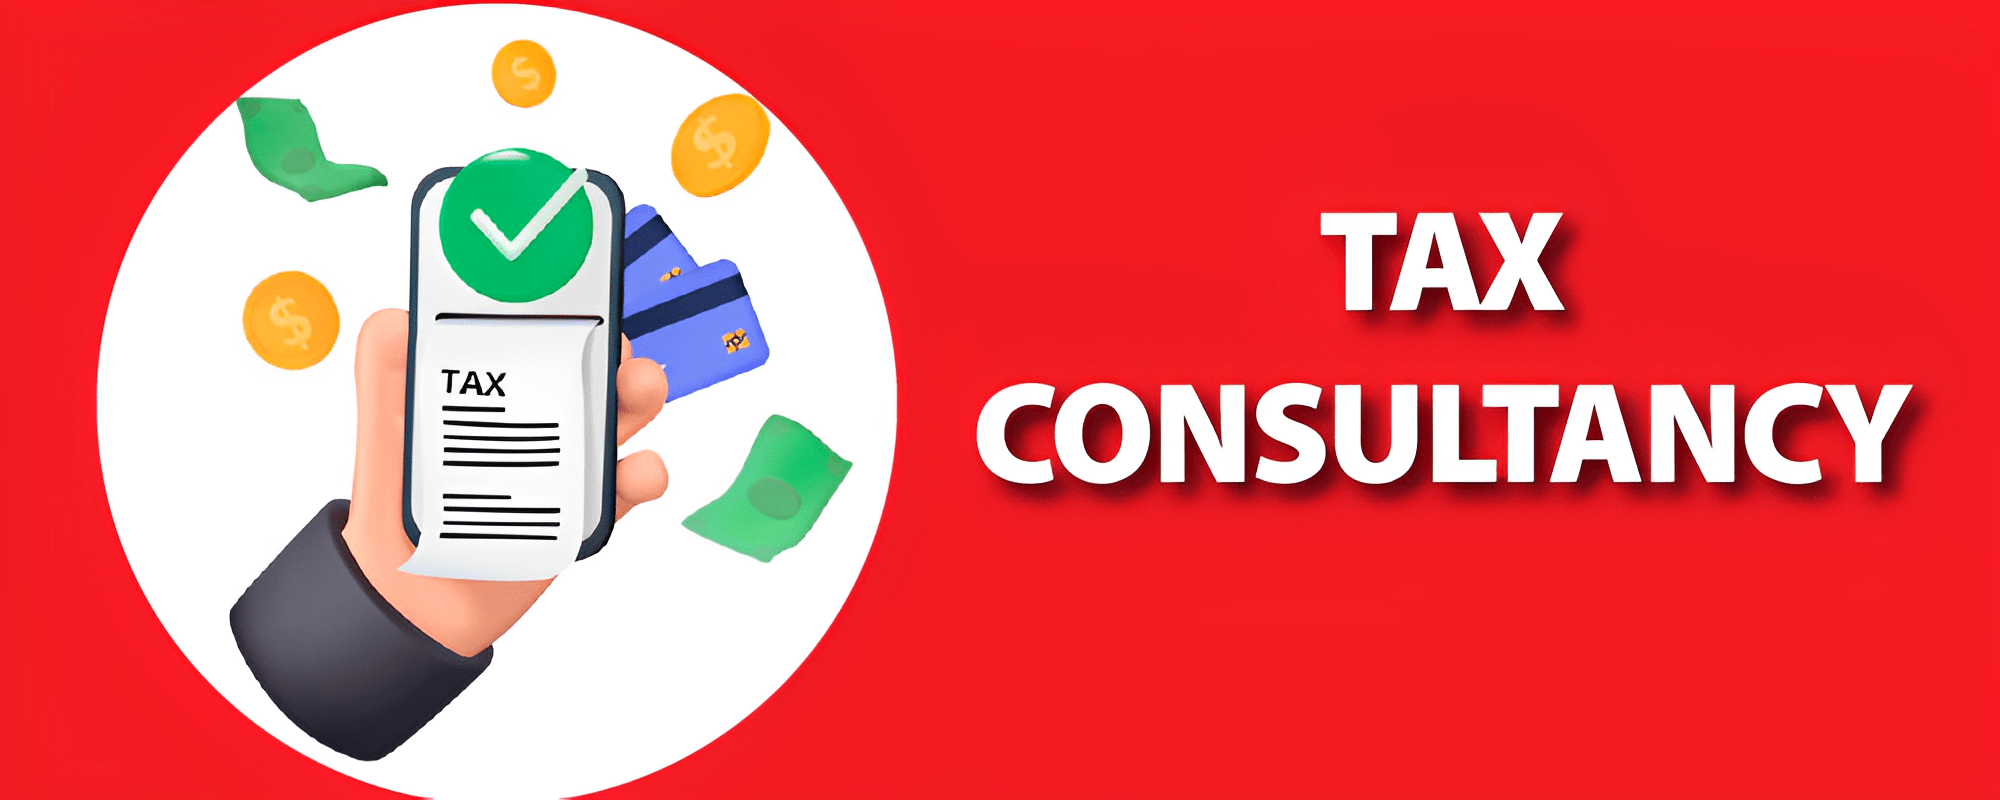 Tax Consultant Logo | Consulting logo, Corporate style, Logo templates